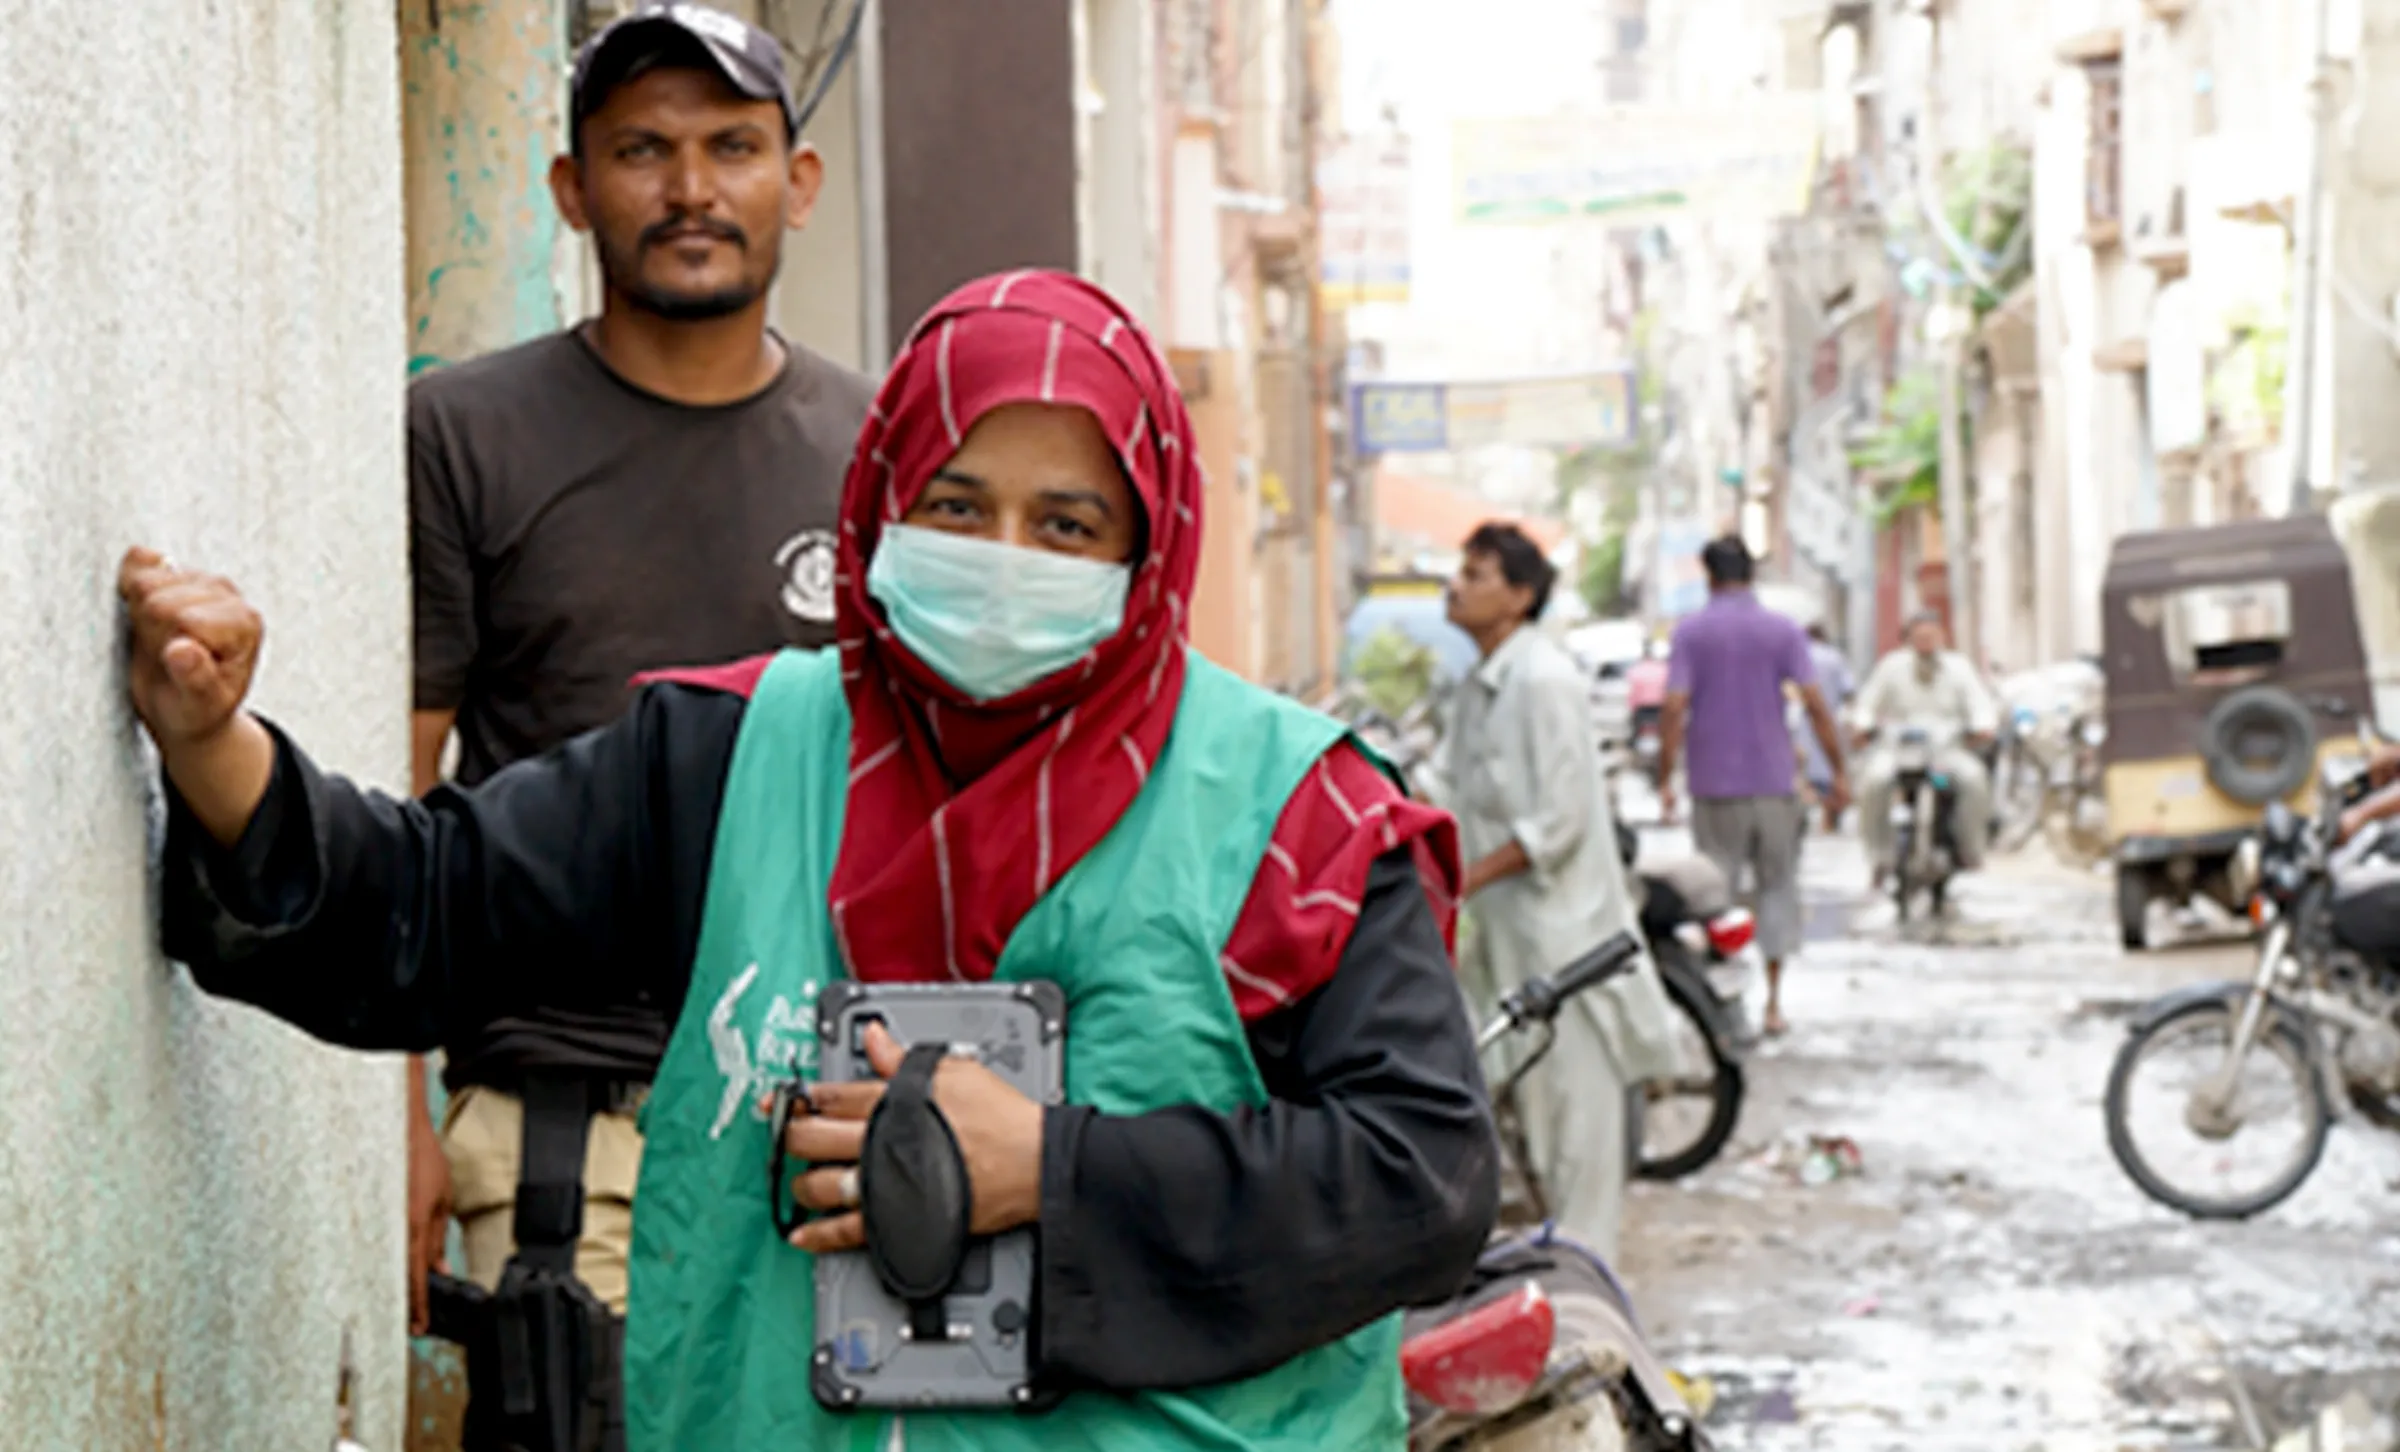 An enumerator during the pilot phase of the digital census in Karachi, Pakistan